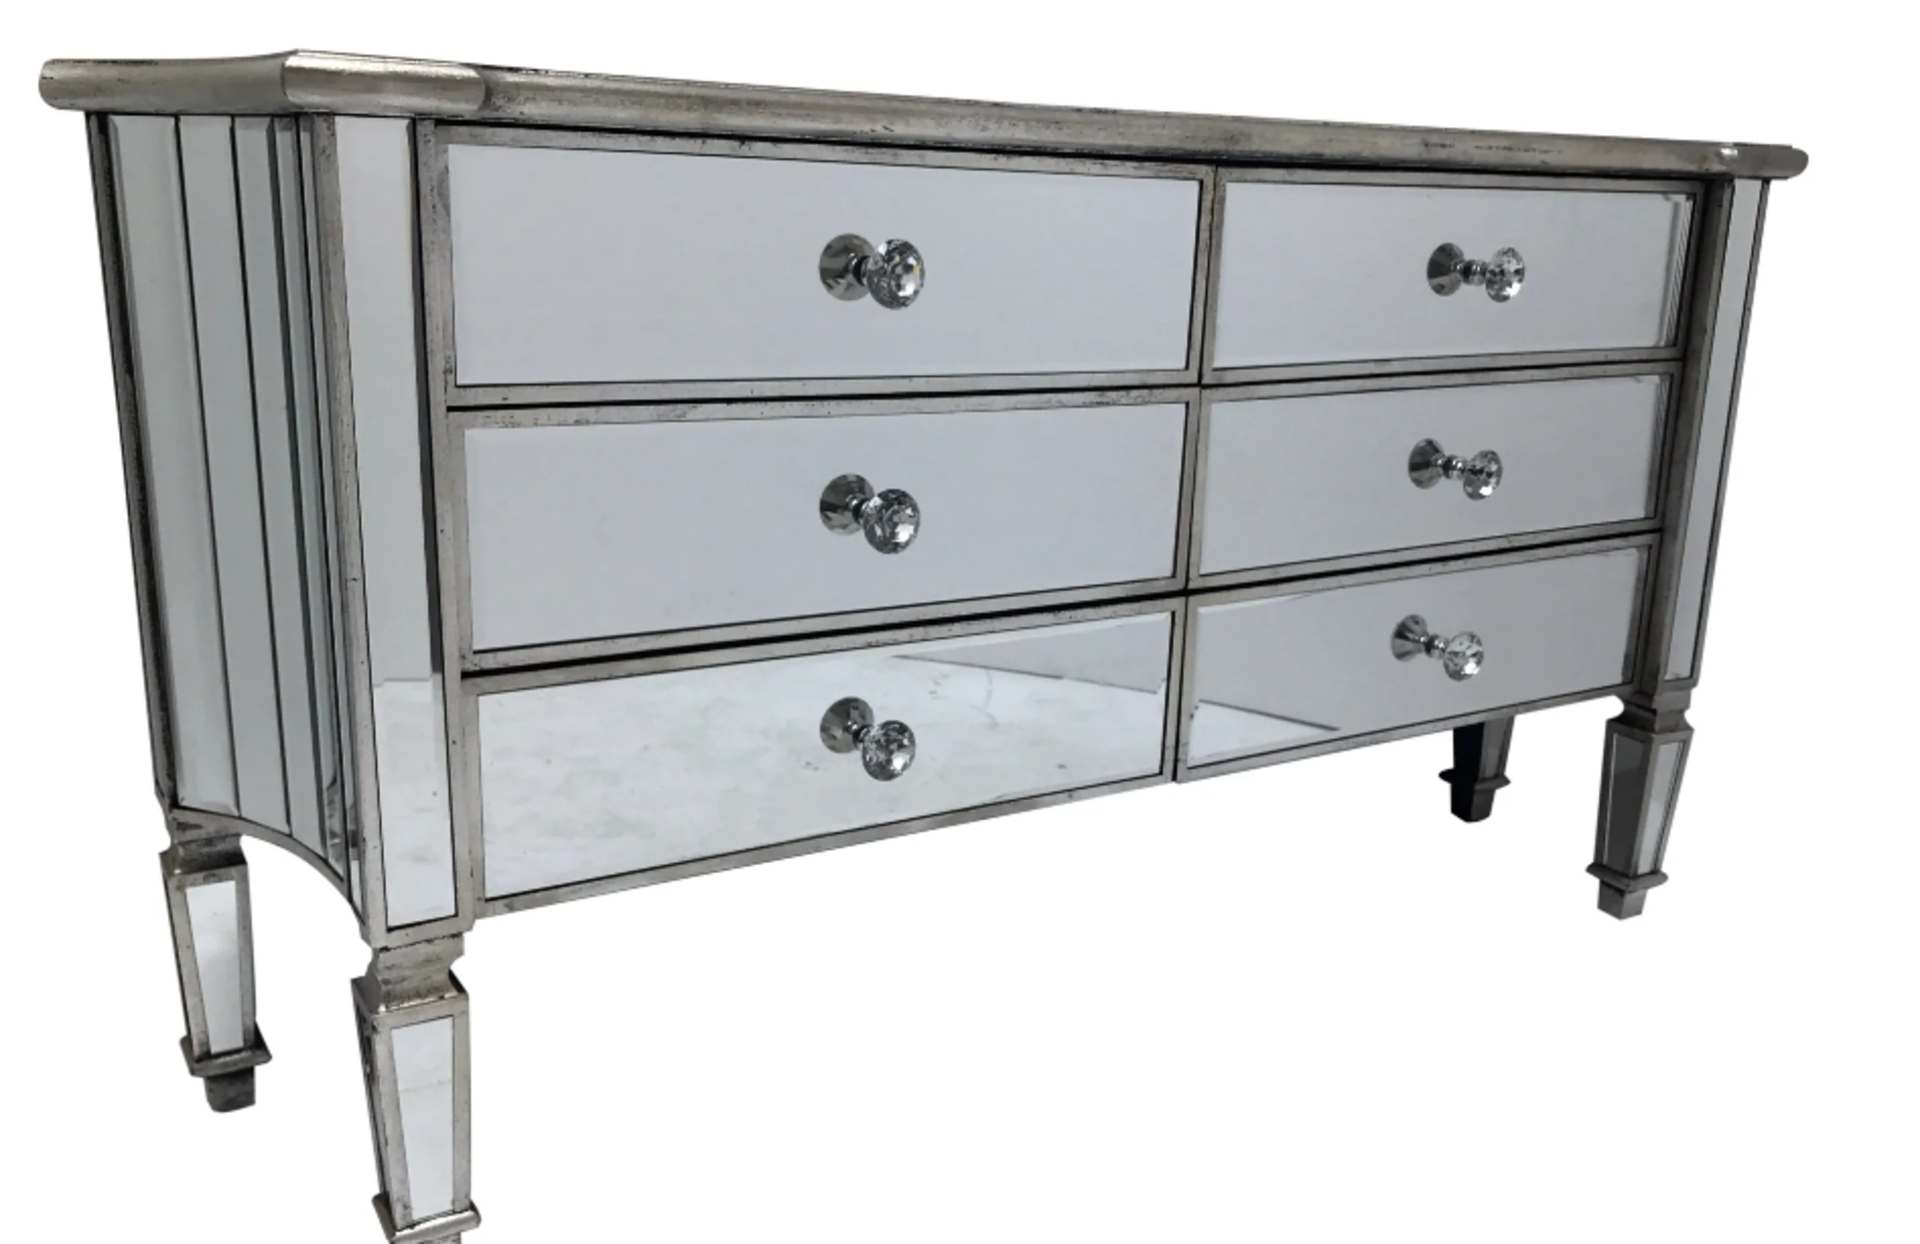 Mirrored Sideboard » 6 Drawers » Crystal Handles. RRP £700.00. - SR4. Picture your living room